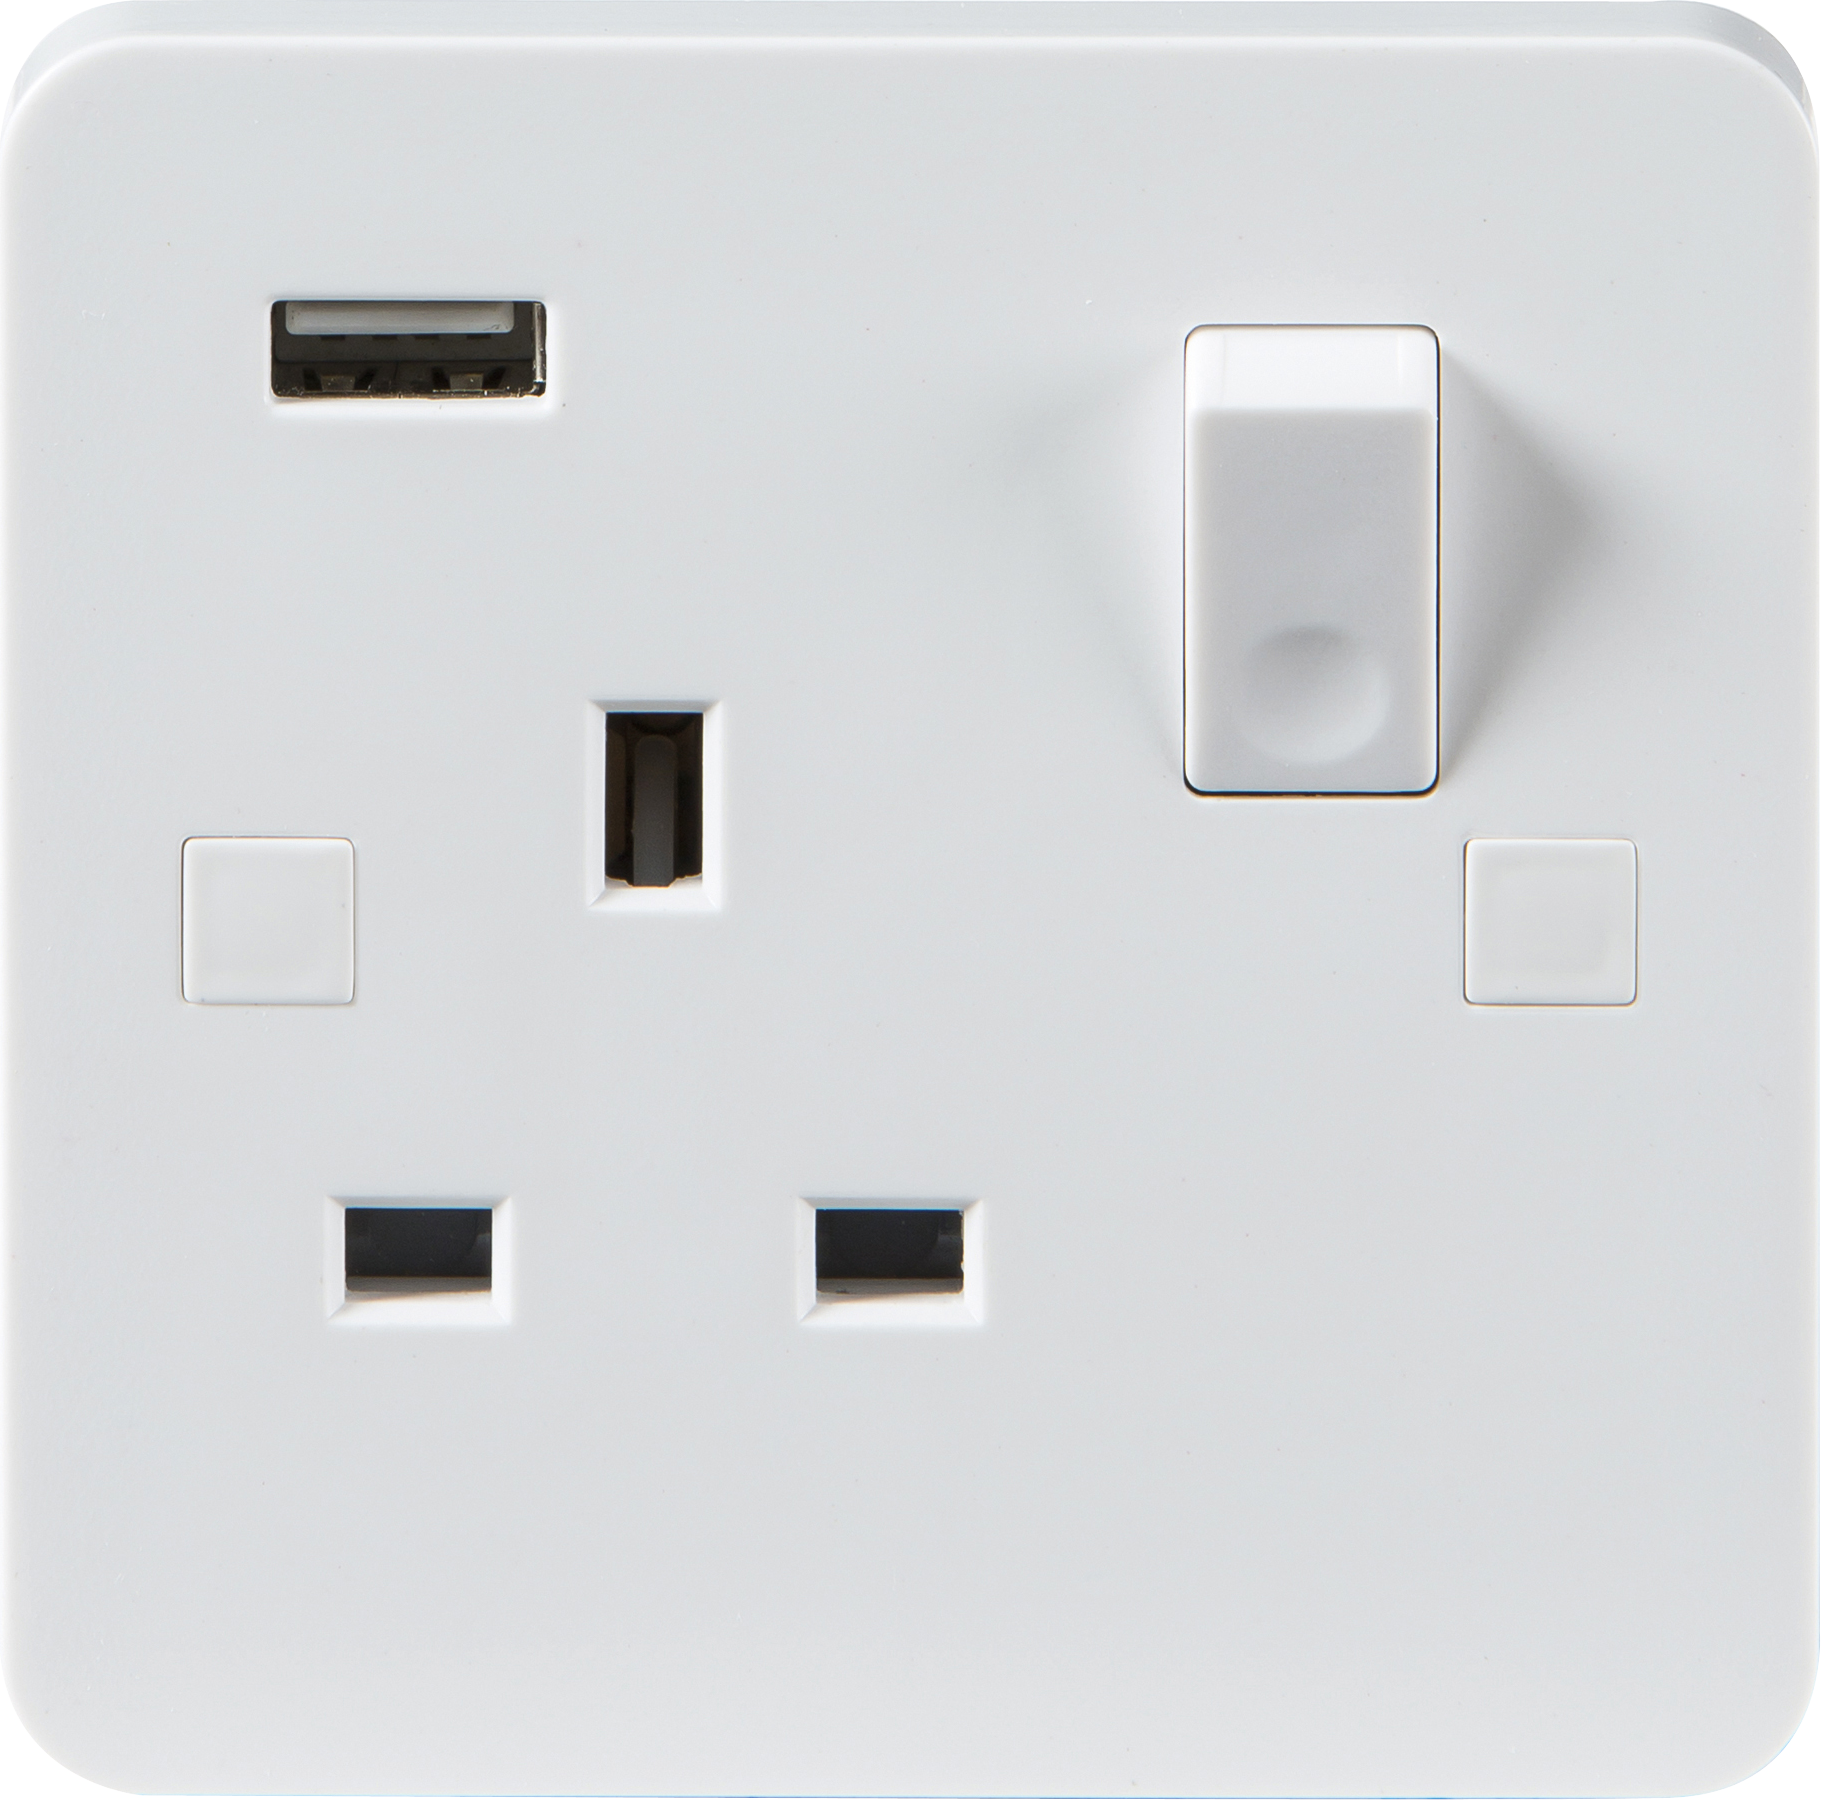 13A 1G DP Switched Socket With USB Charger 5V DC 1A - 9mm - PU9901 